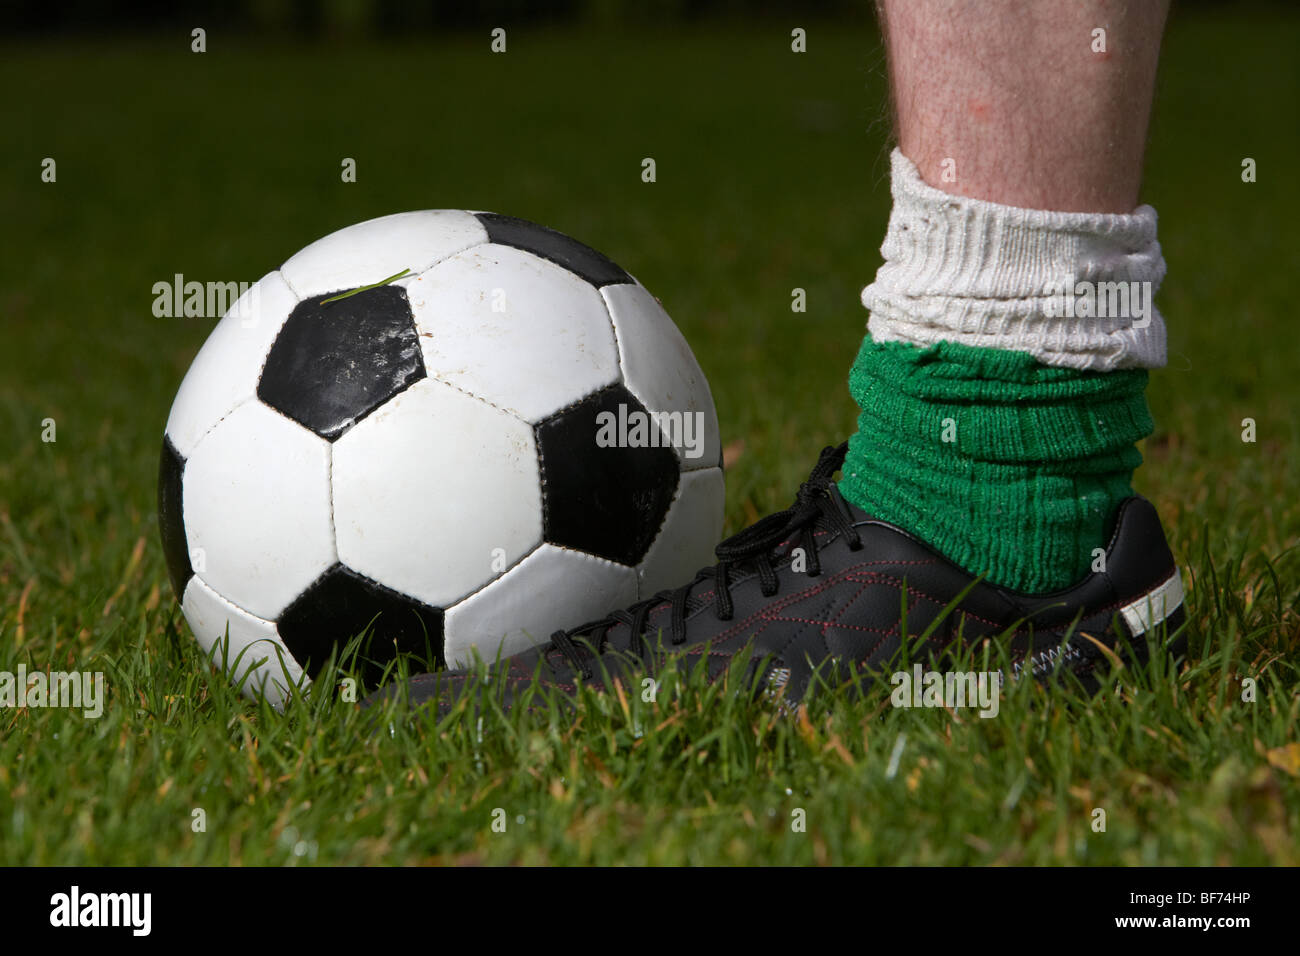 soccer football player addressing the ball with his foot Stock Photo